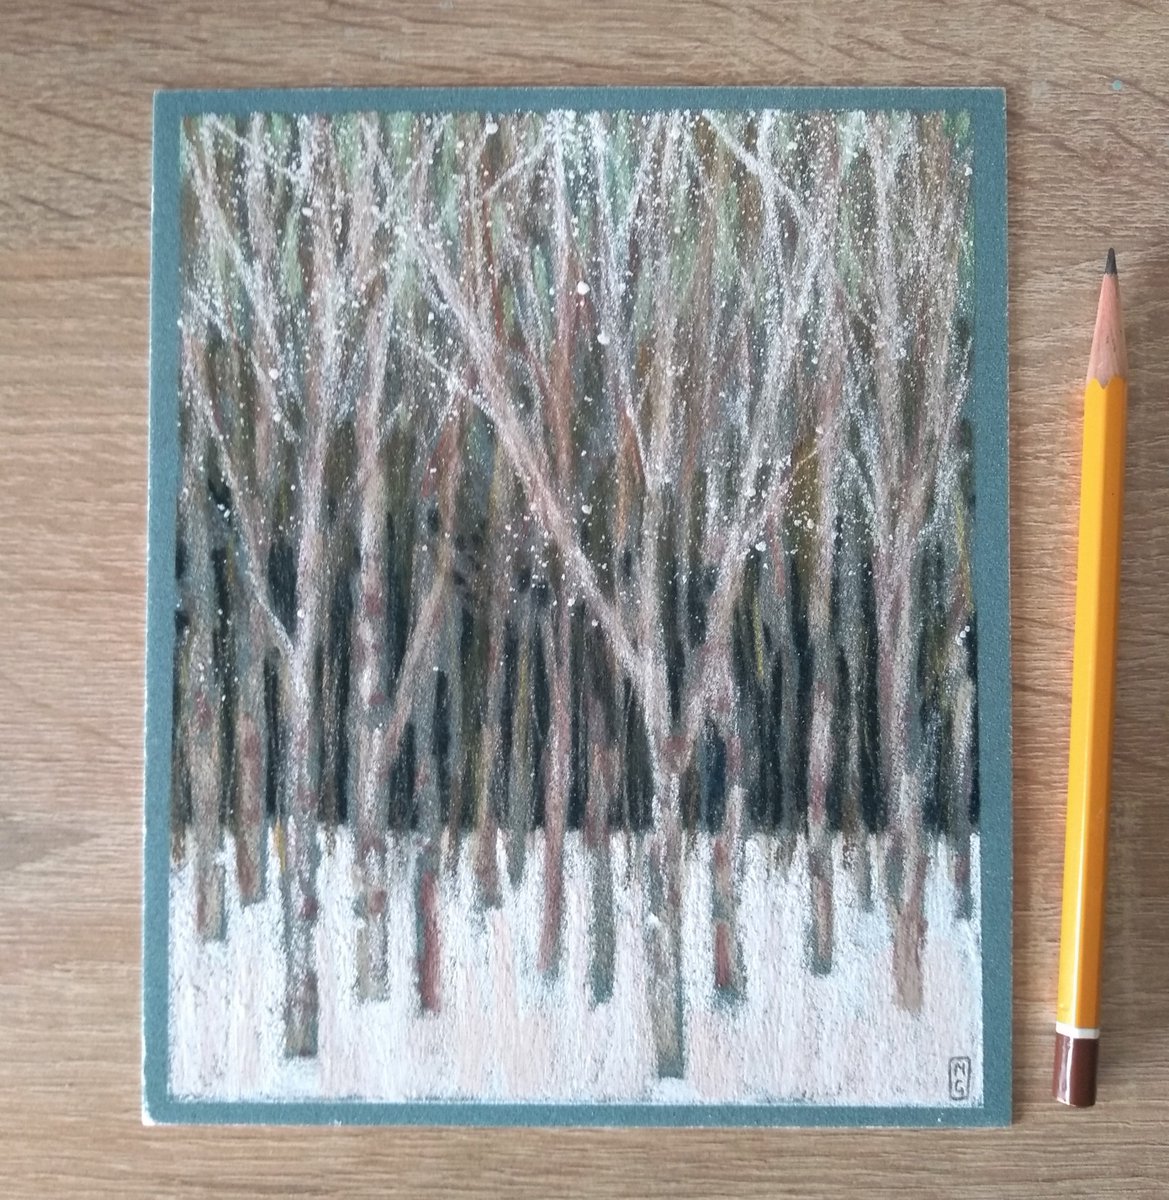 I'm needing to cool down these days with this crazy heatwave we are having in Scotland!  A little bit of winter art should do the trick☺️👇
Original soft pastel painting - Winter Woodland etsy.me/3IV5nNr via @Etsy 
#winter #snow #landscape #SoftPastel #Painting